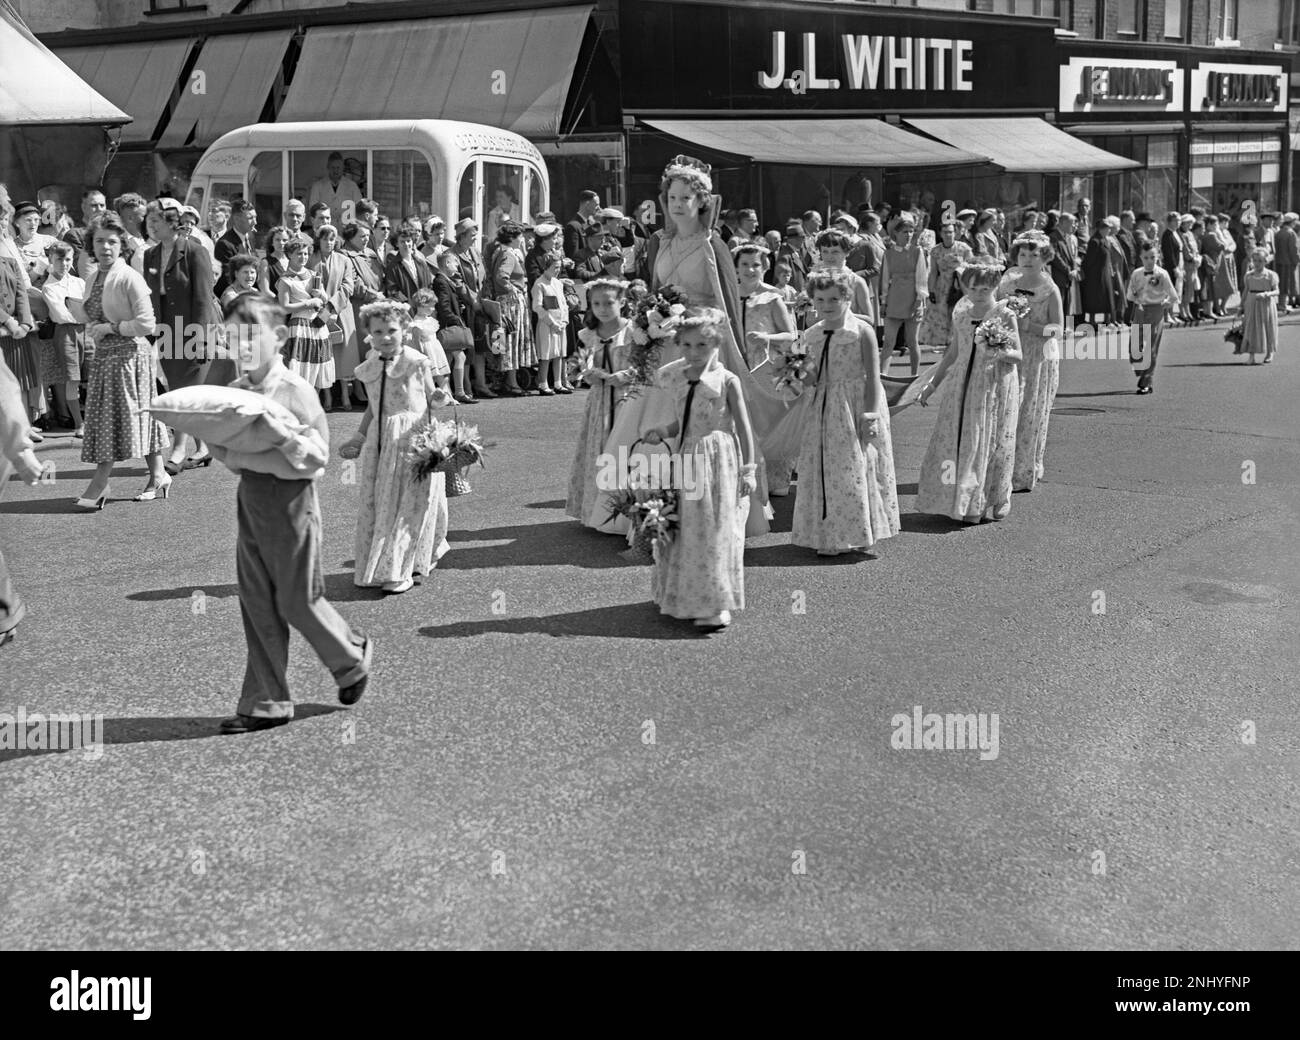 A Whit Walks procession in Union Street, Oldham, Greater Manchester, Lancashire, England, UK c.1960. A ‘Rose Queen’ wearing her crown is surrounded by children carrying flowers. An O’Donnell’s ice cream van is in the background. The Church of England religious event traditionally took place on Whit Friday, with children heavily involved along with brass and silver bands. This is taken from an old black and white negative – a vintage 1950s/60s photograph. Stock Photo